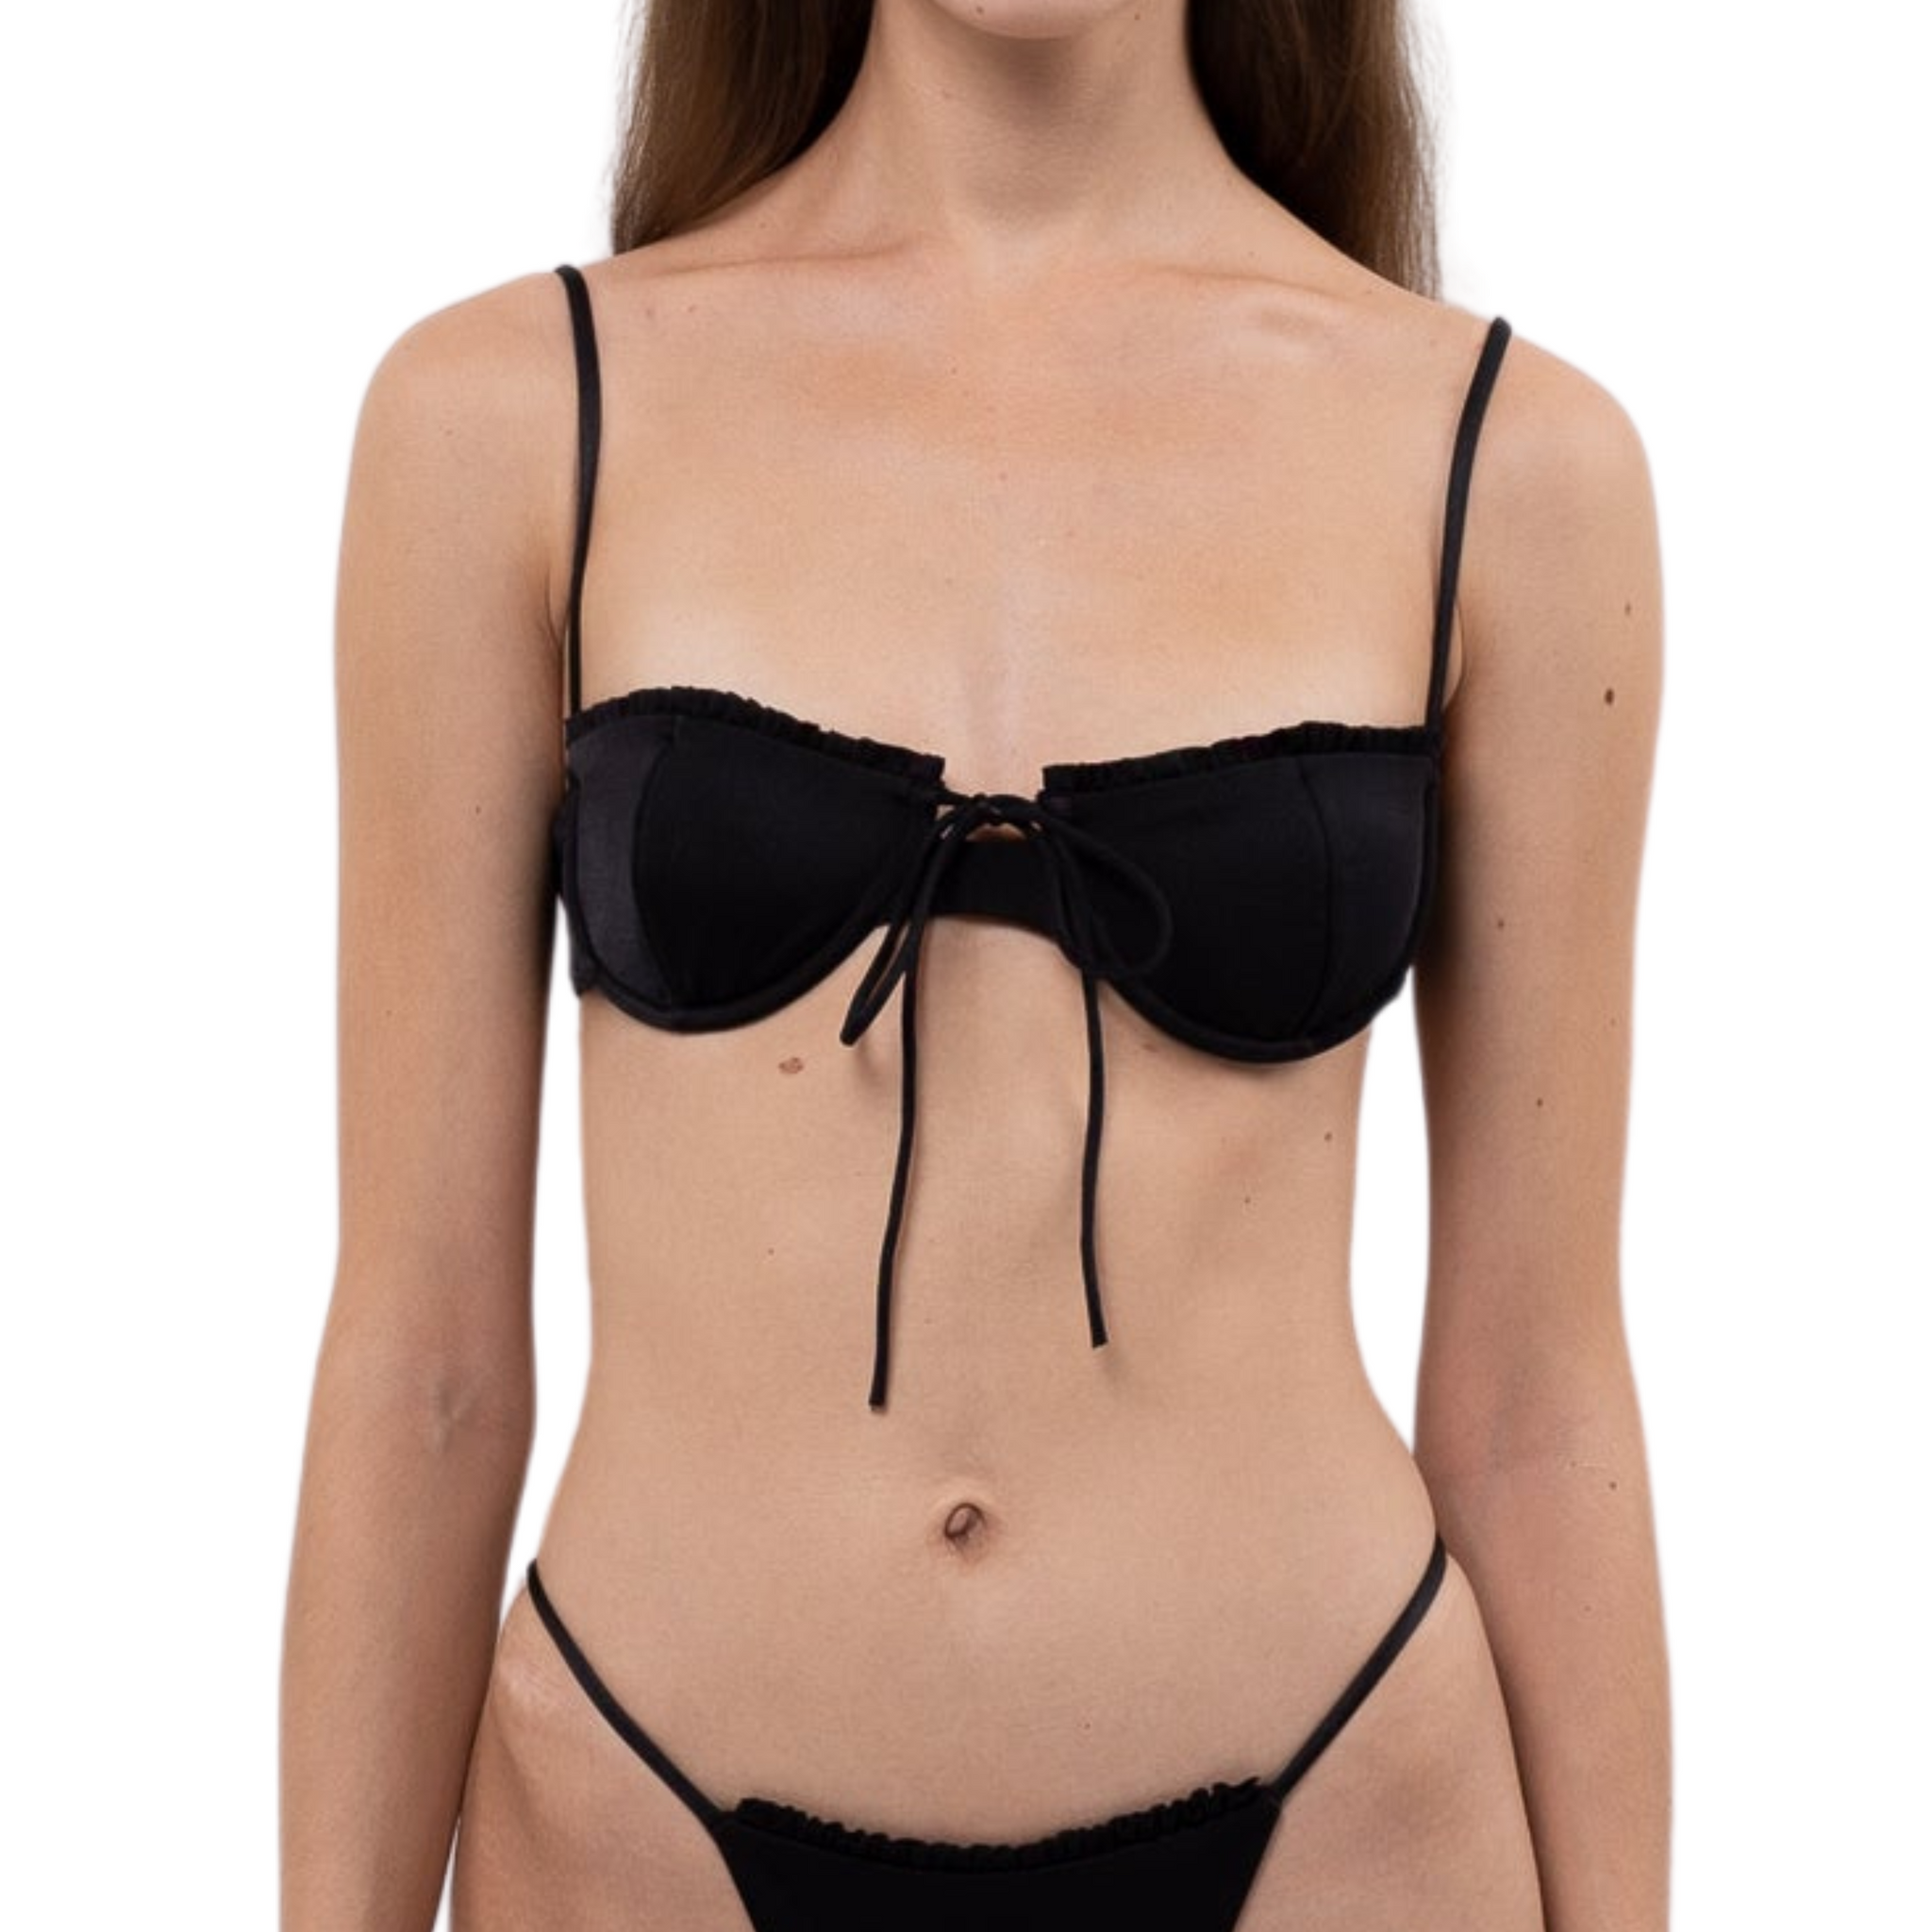 Amour Top – Black